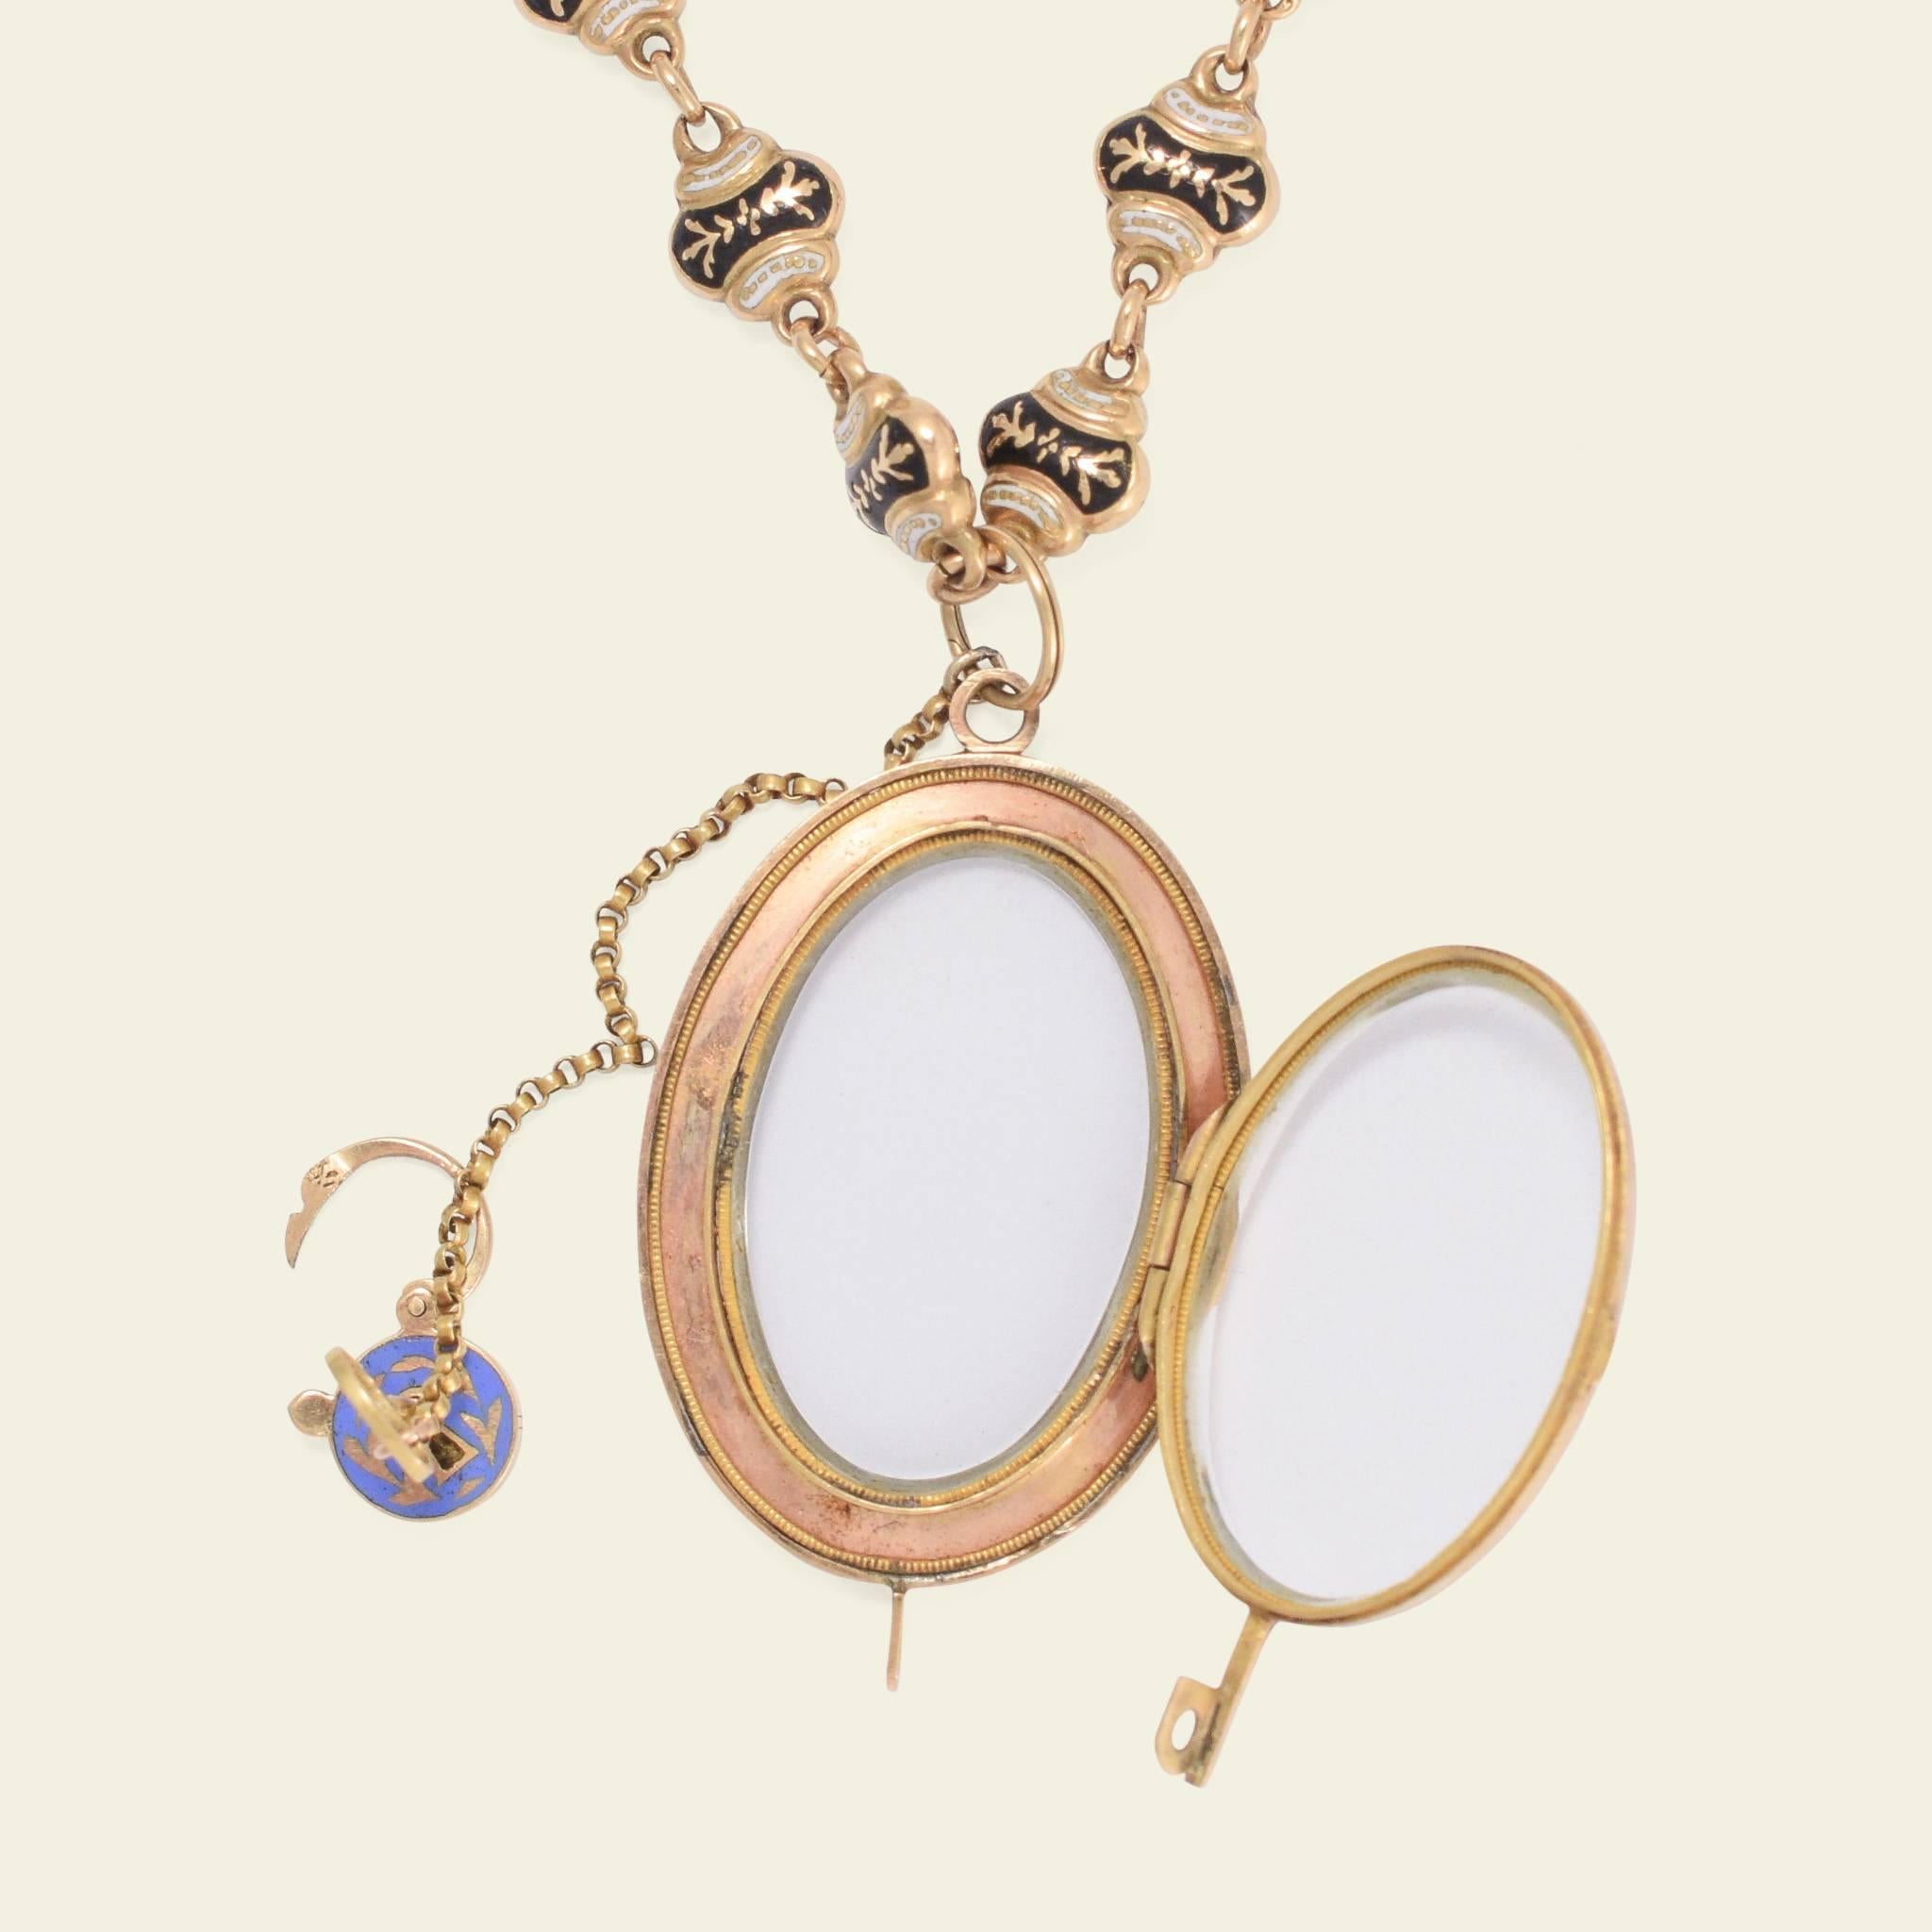 This phenomenal Swiss enamel locket necklace is fashioned 18k gold and dates to the mid 19th century. Each hollow link of the chain is beautifully enameled in blue and black with a lovely decorative clasp stamped with French import marks. The locket